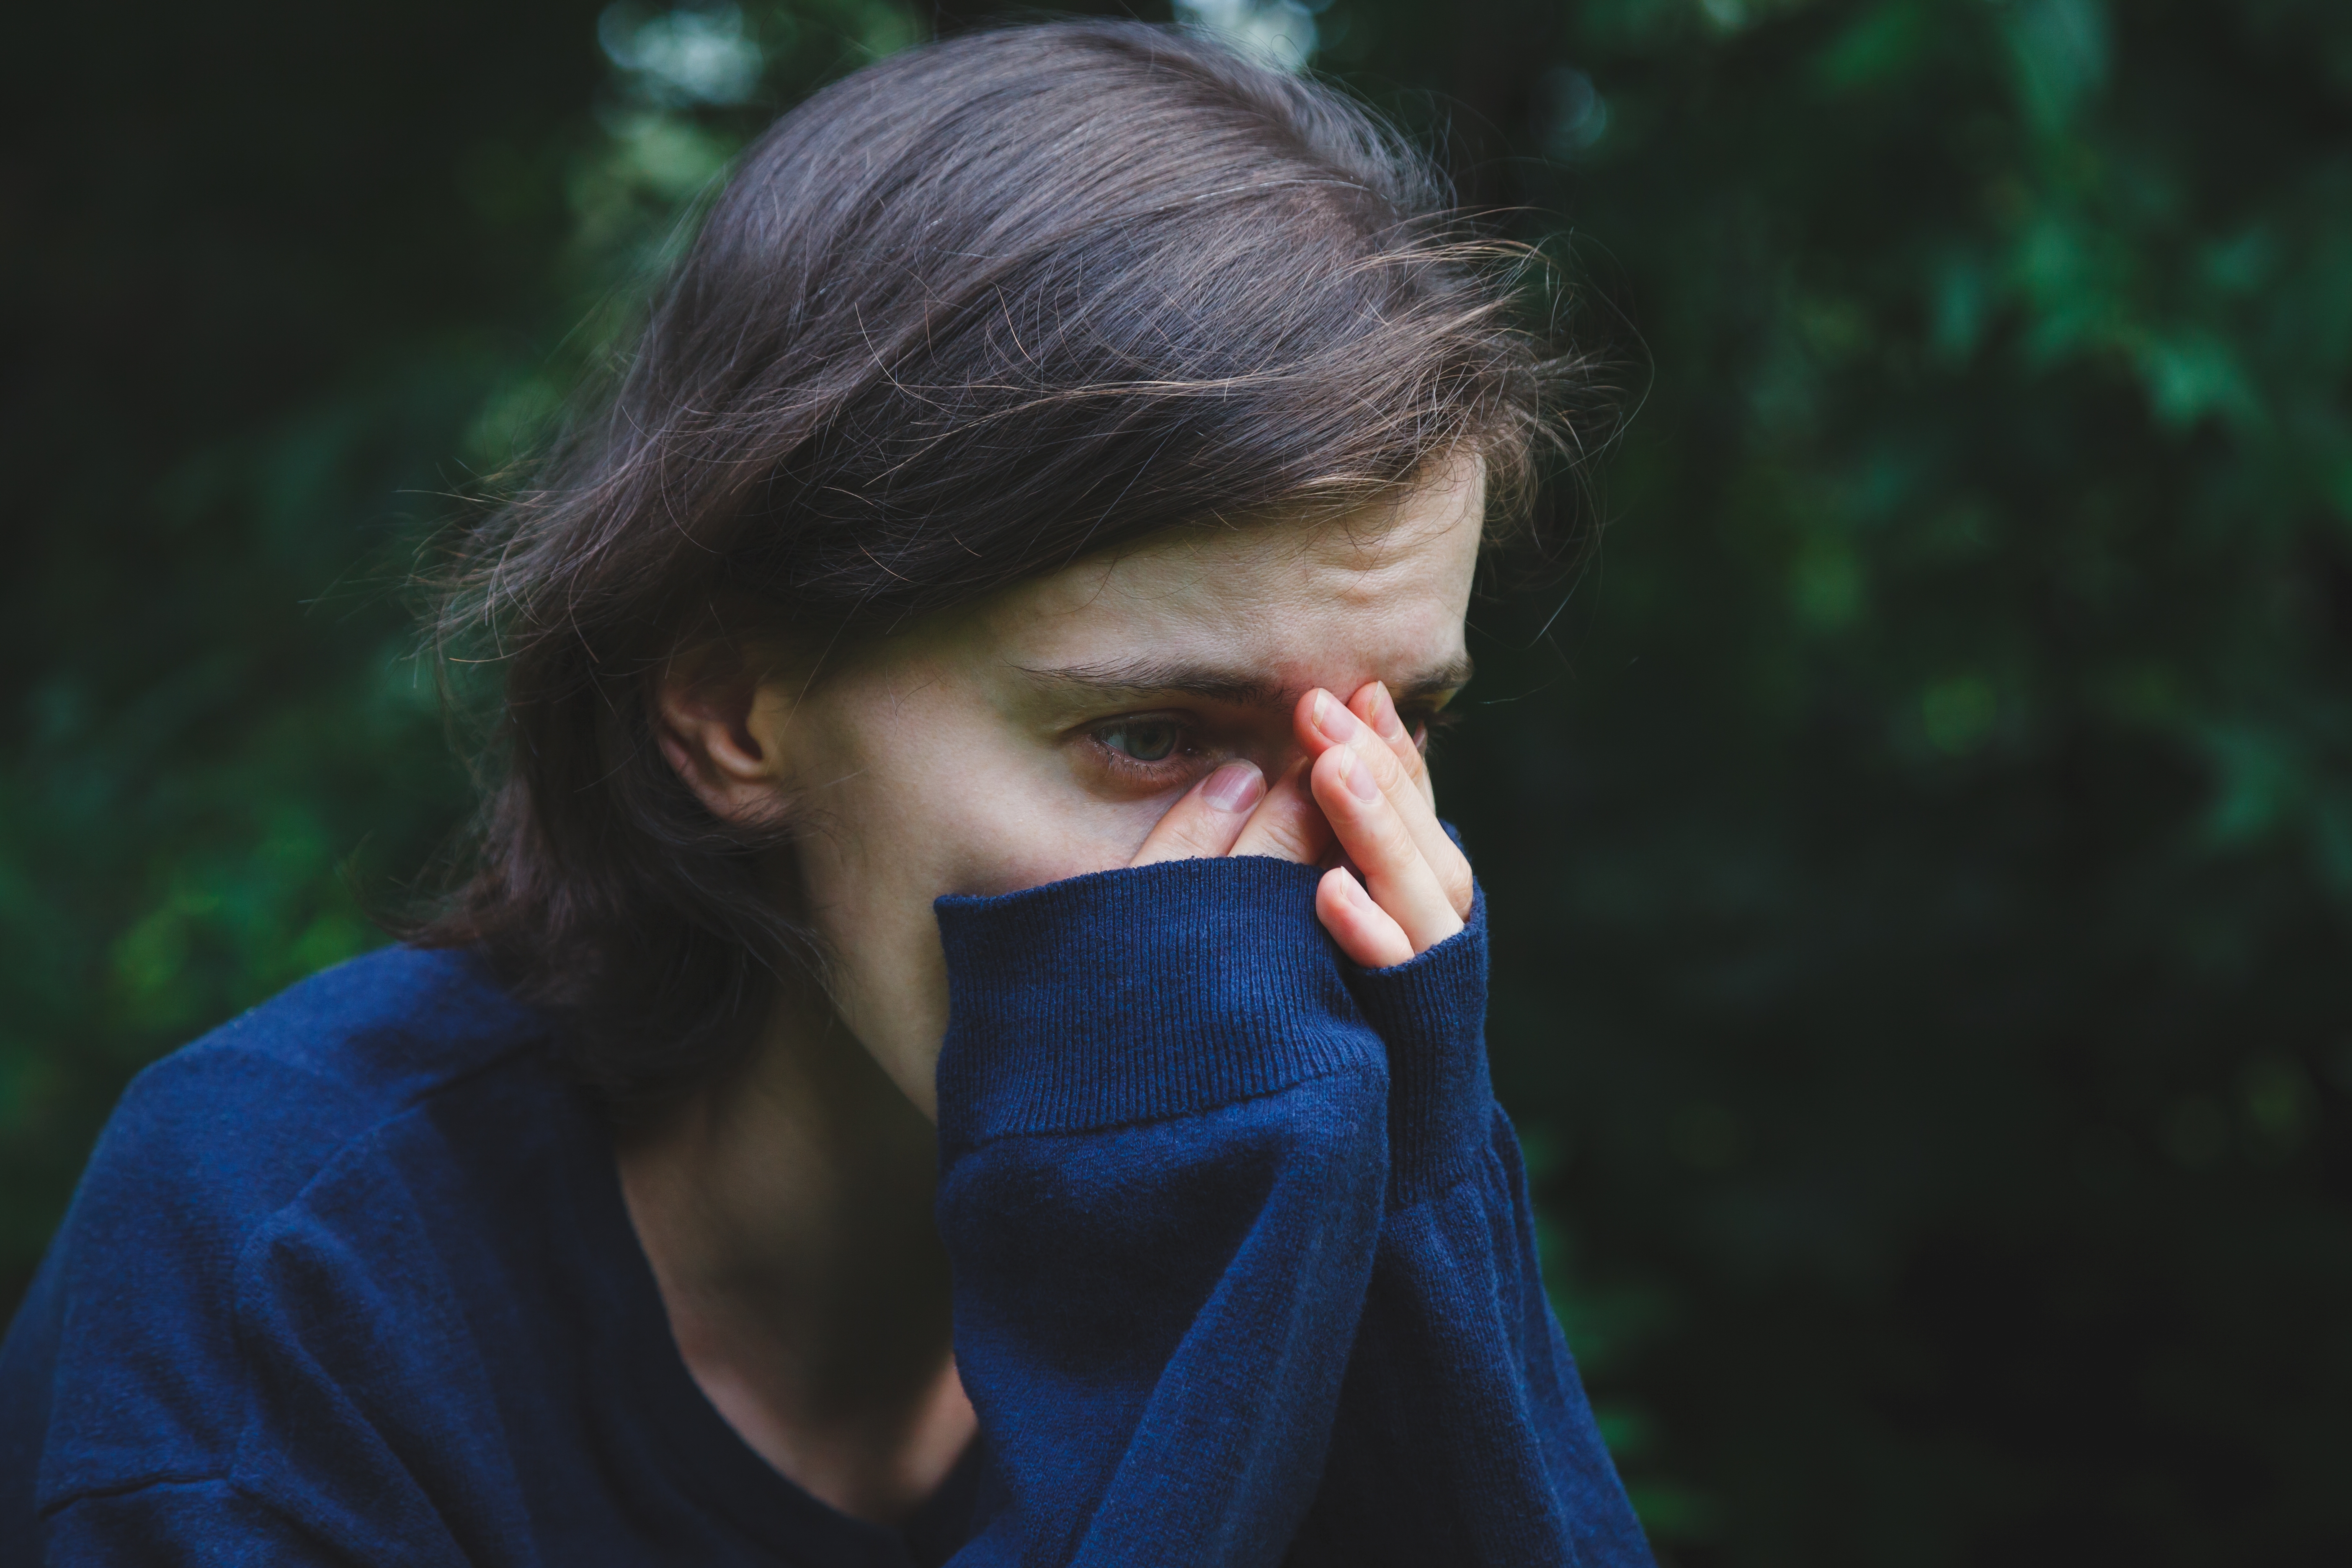 Sad young woman | Source: Shutterstock